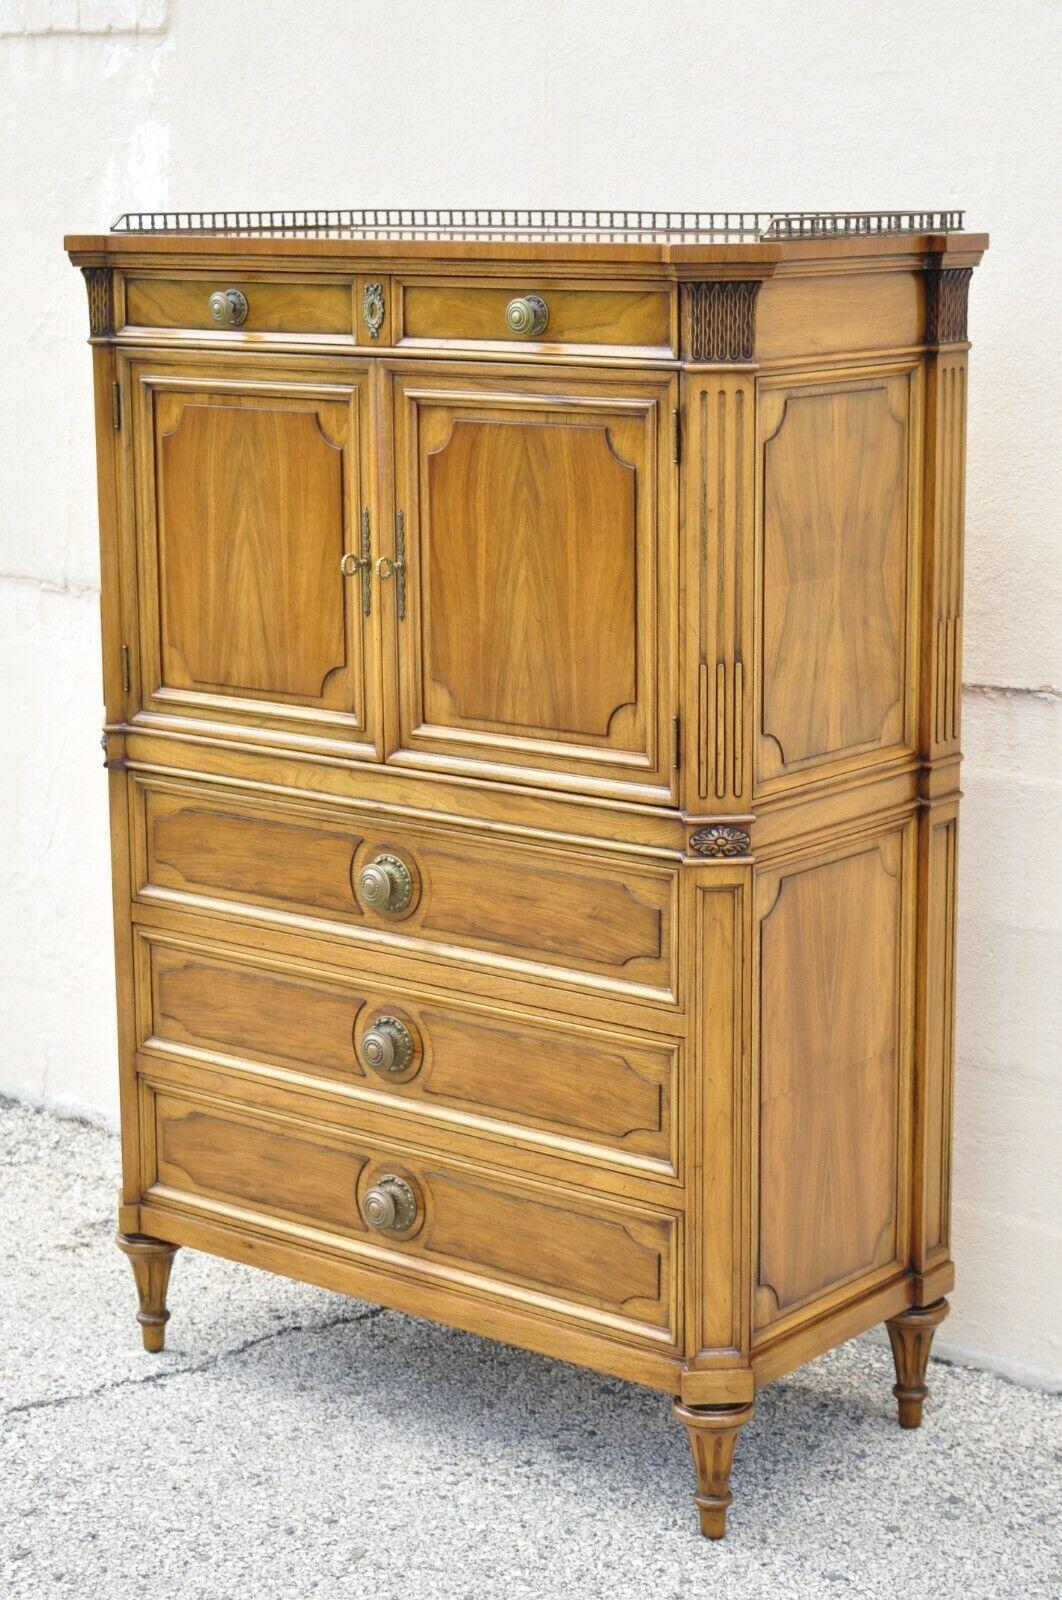 Karges French Regency Style neoclassical walnut tall chest dresser cabinet. Item features a brass gallery, 2 small interior drawers, beautiful woodgrain, 2 swing doors, 4 dovetailed drawers, tapered legs, solid brass hardware, quality American